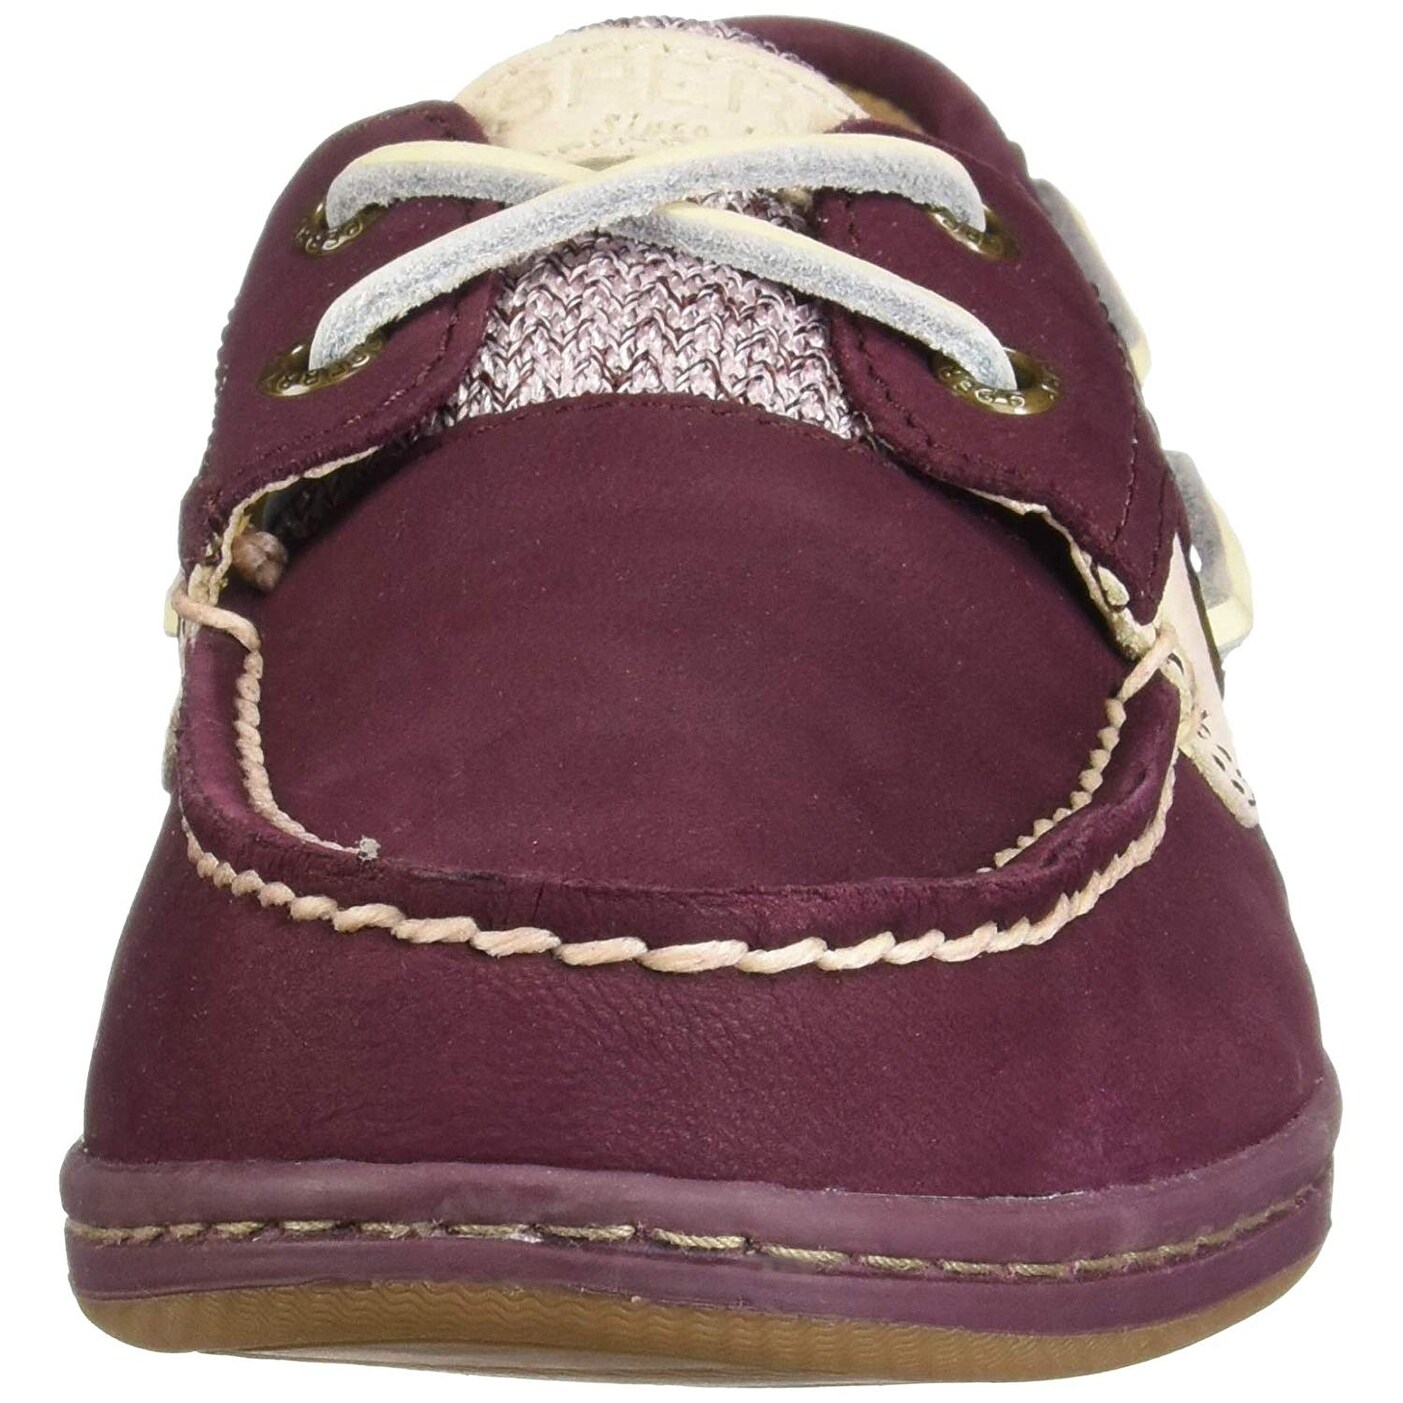 sperry women's koifish tweed boat shoes